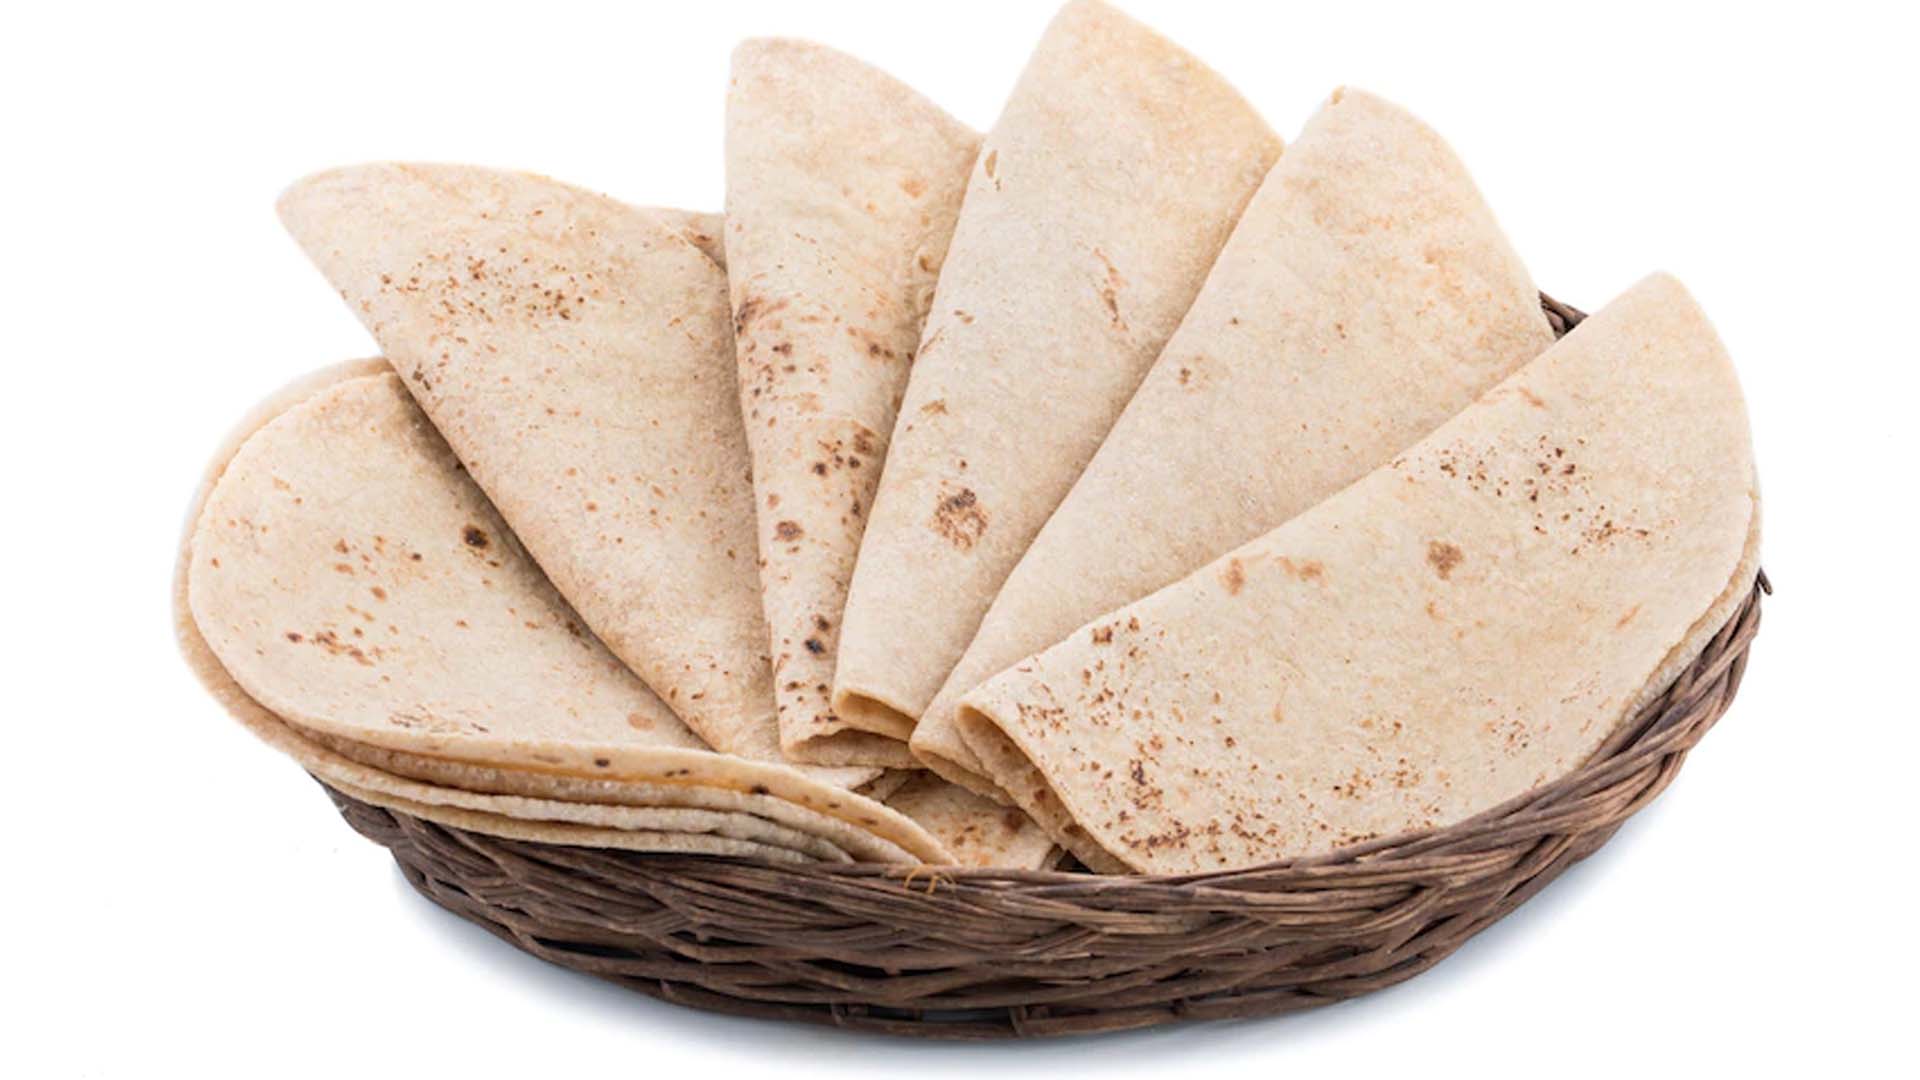 Nutrition Facts and Benefits of Chapati